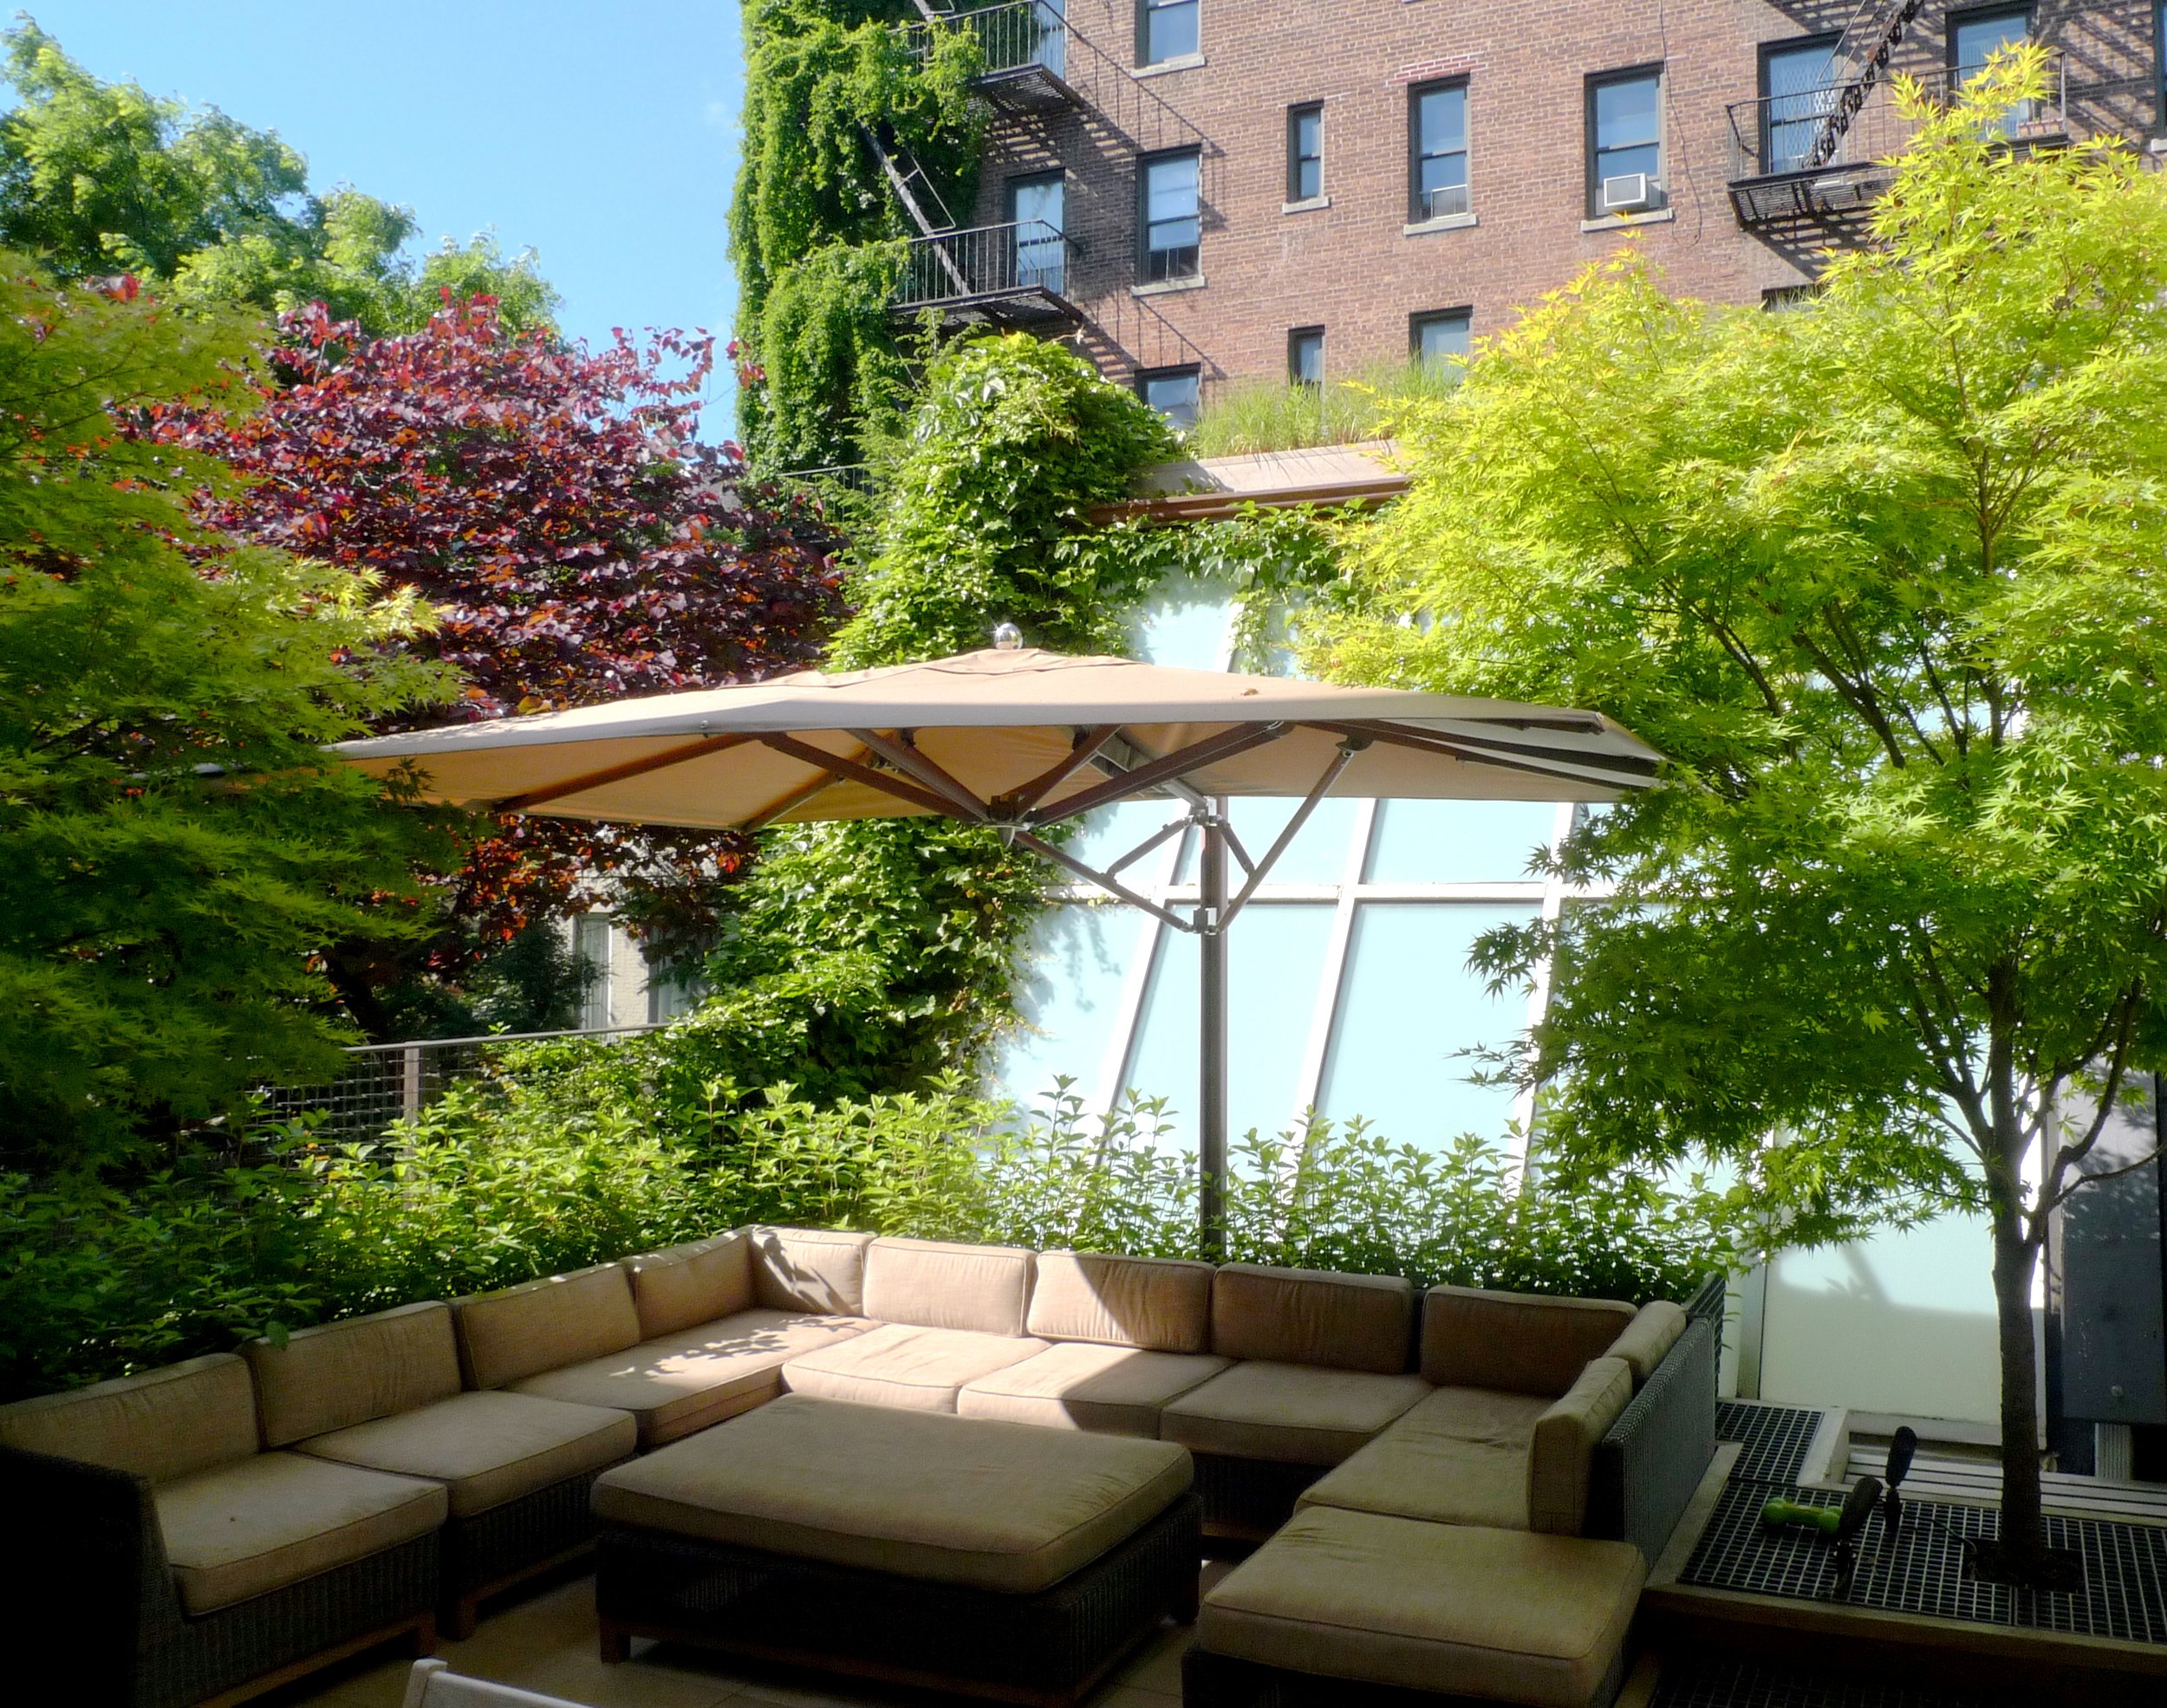 WB nyc rooftop terrace garden design outdoor space seating shade structure installation horticulture maintenance.jpg